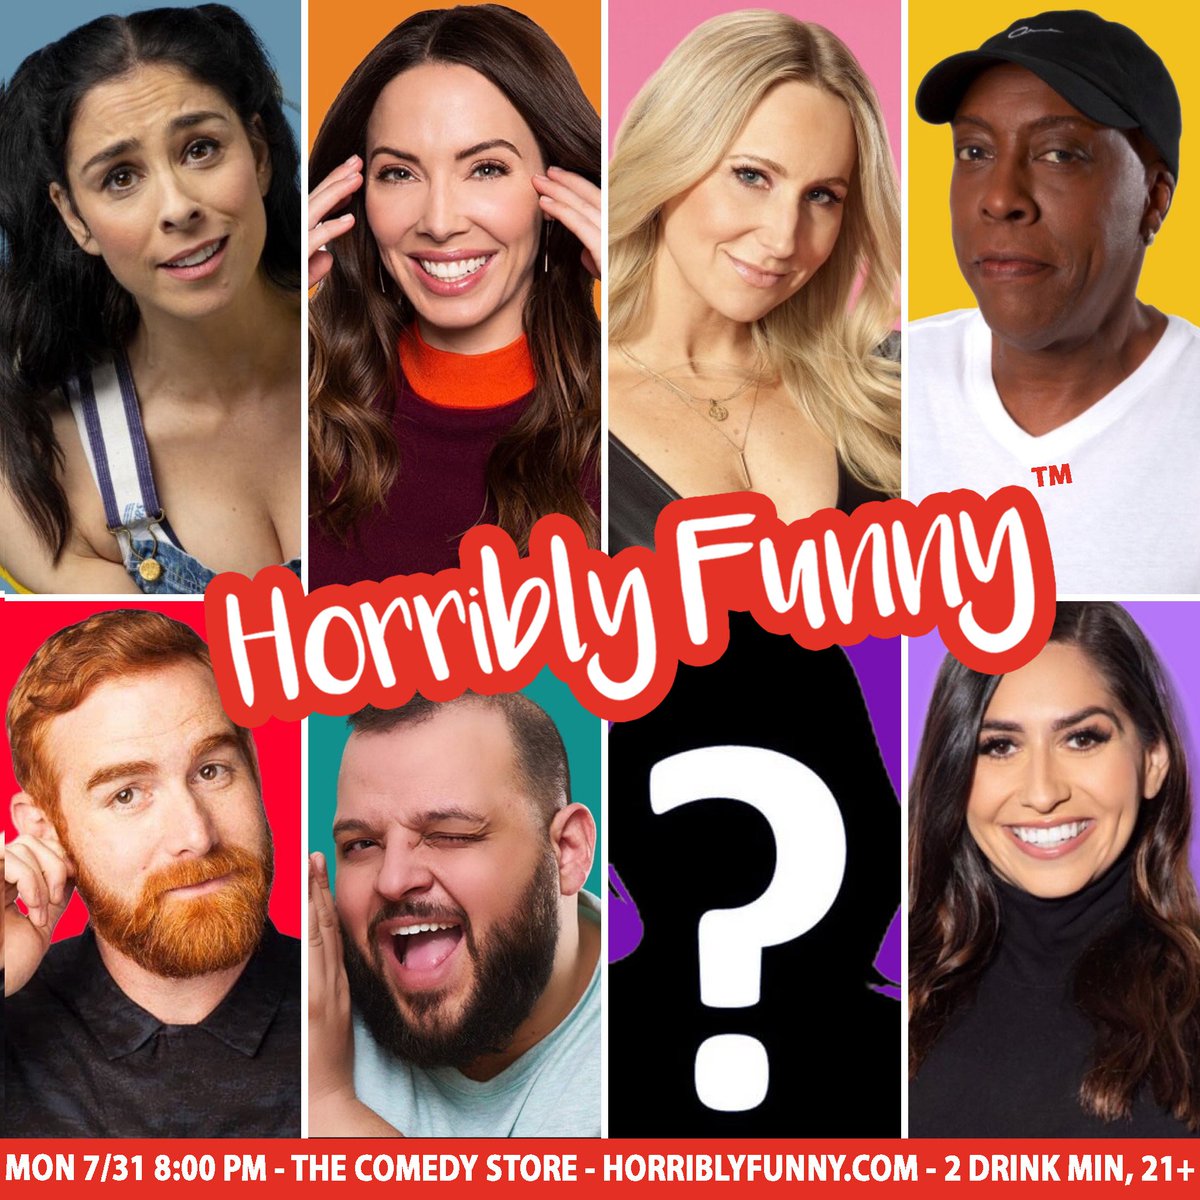 July 31 #horriblyfunny takes over the Main Room!

8pm *25 Tickets Remaining* with Sarah Silverman, Arsenio Hall, Whitney Cummings, Nikki Glaser +more https://t.co/AagG0UWk3J

10:30 with Whitney Cummings, Andrew Santino, Erik Griffin, Frankie Quinones +more https://t.co/3rauRrjs1n https://t.co/l2n0cmMy5W